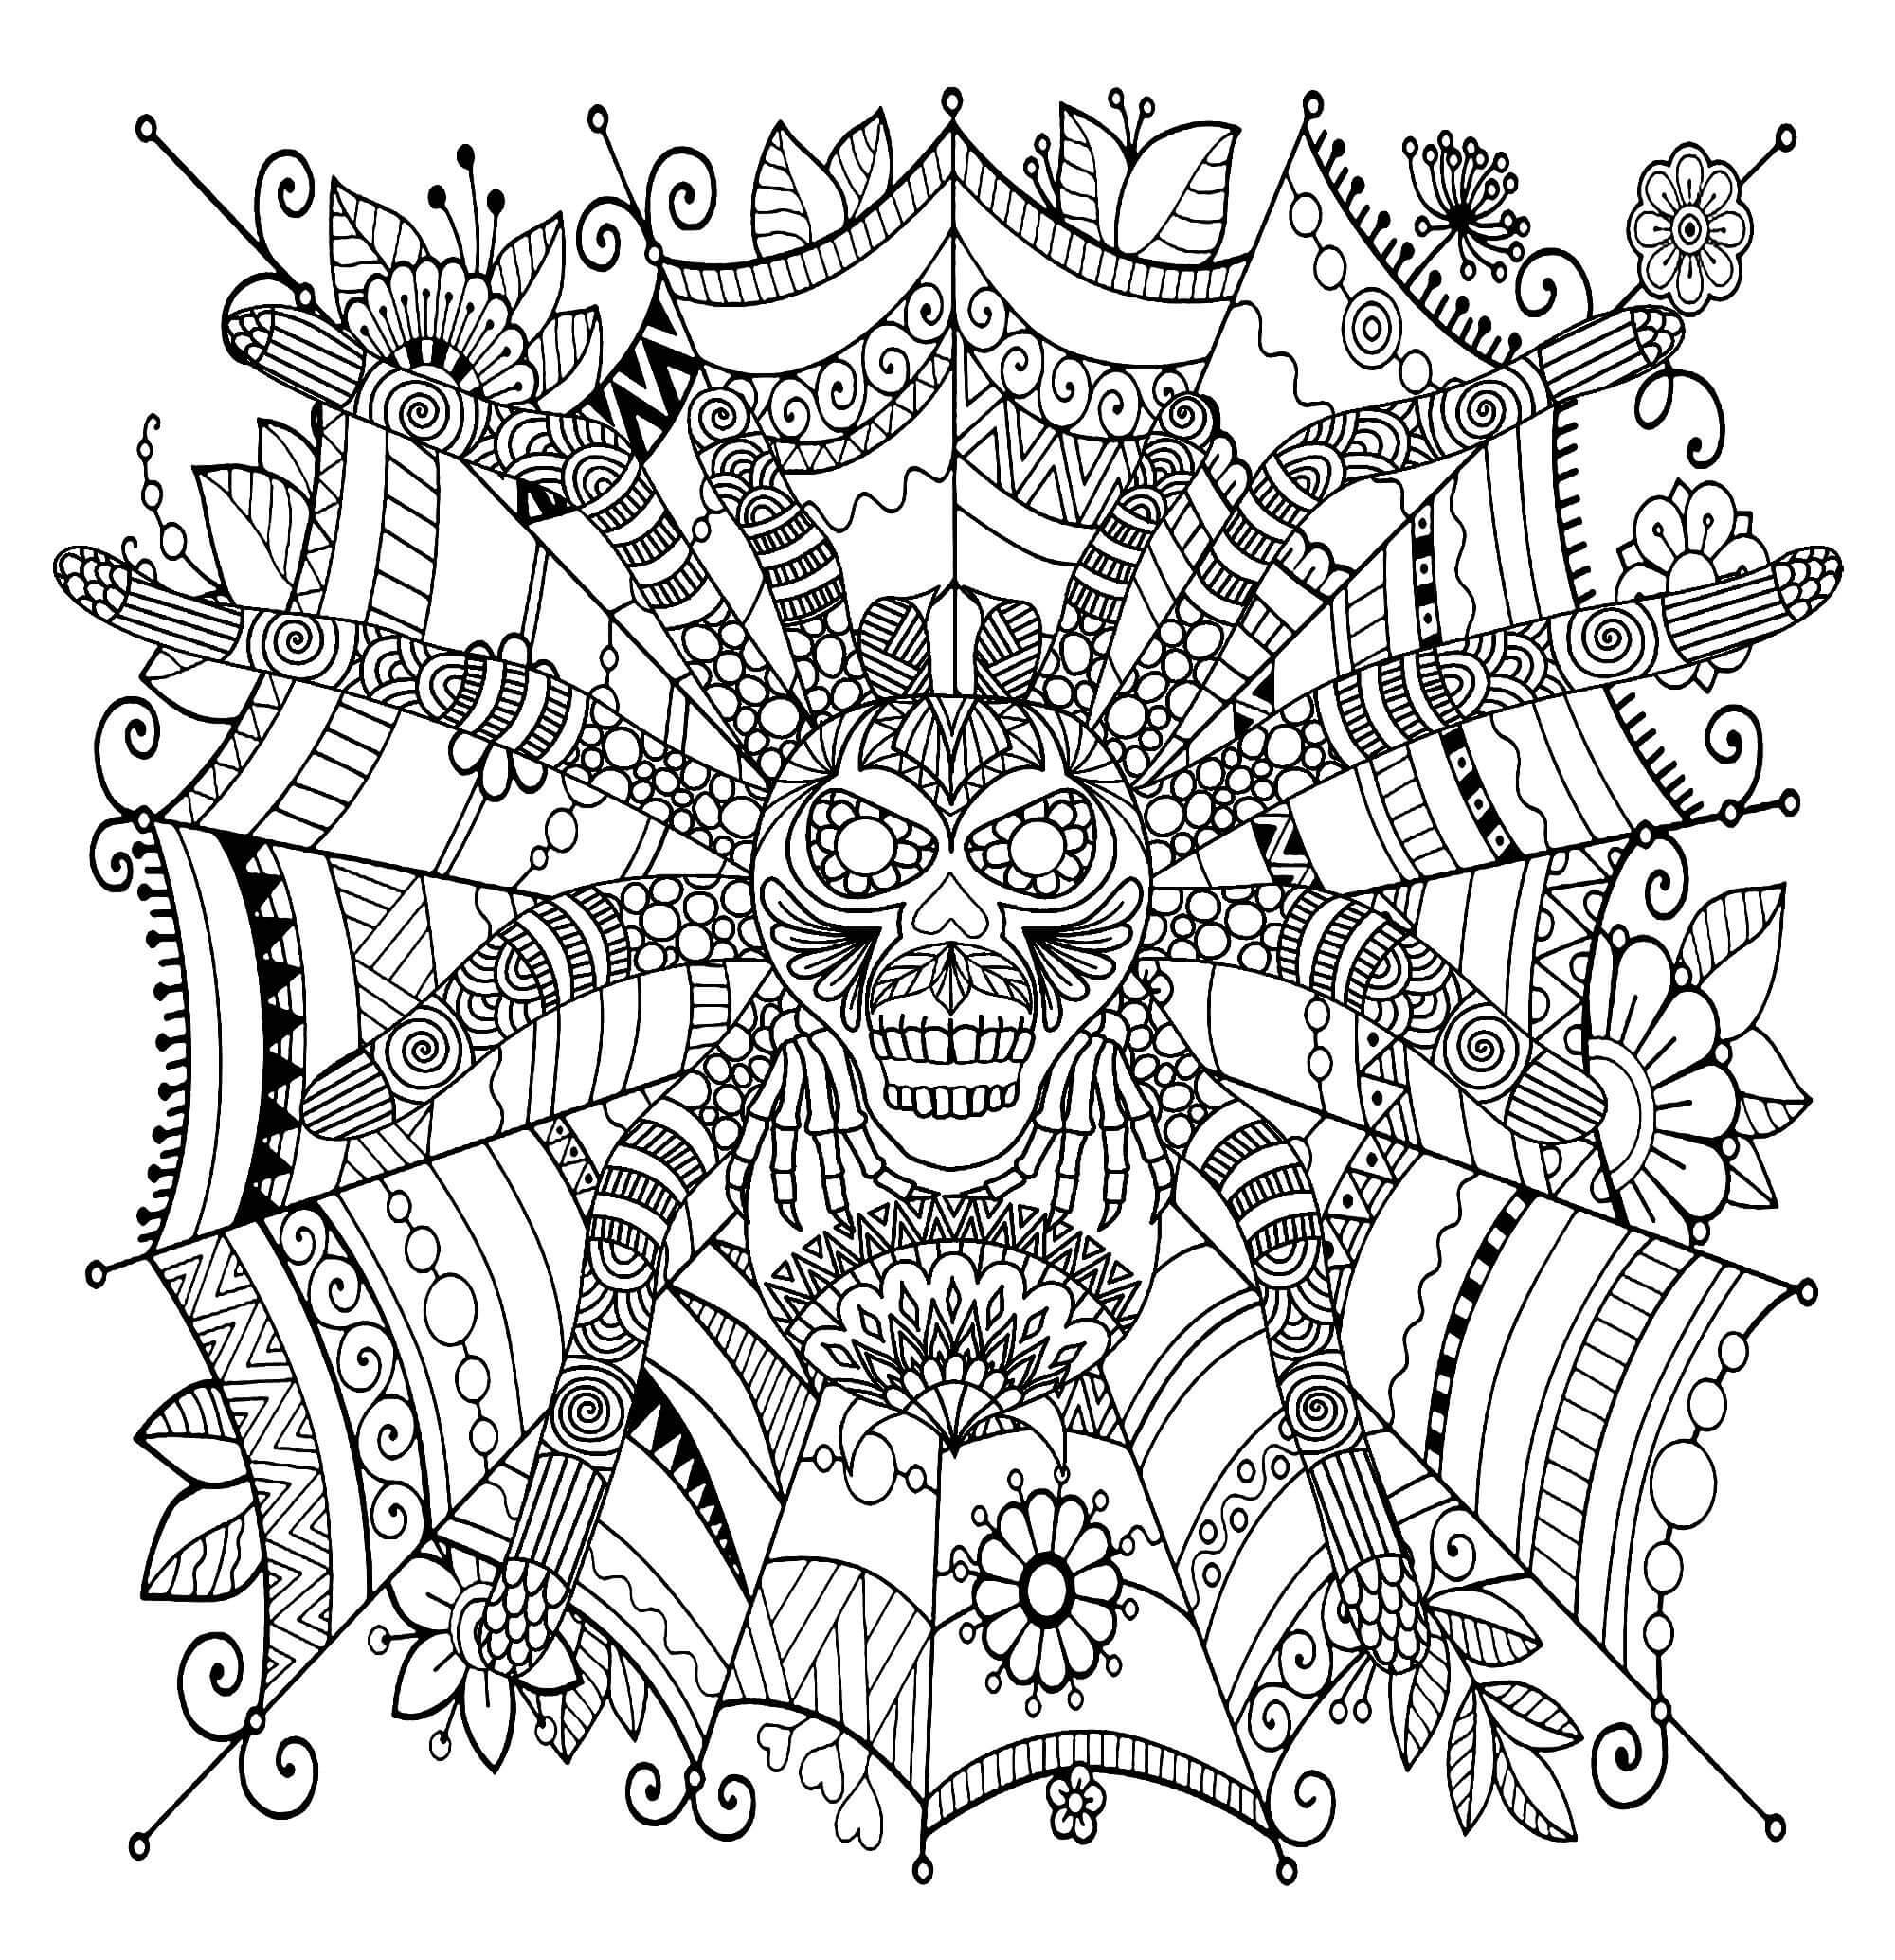 Mandala Big Spider With Flower and Leaves Coloring Page Mandala